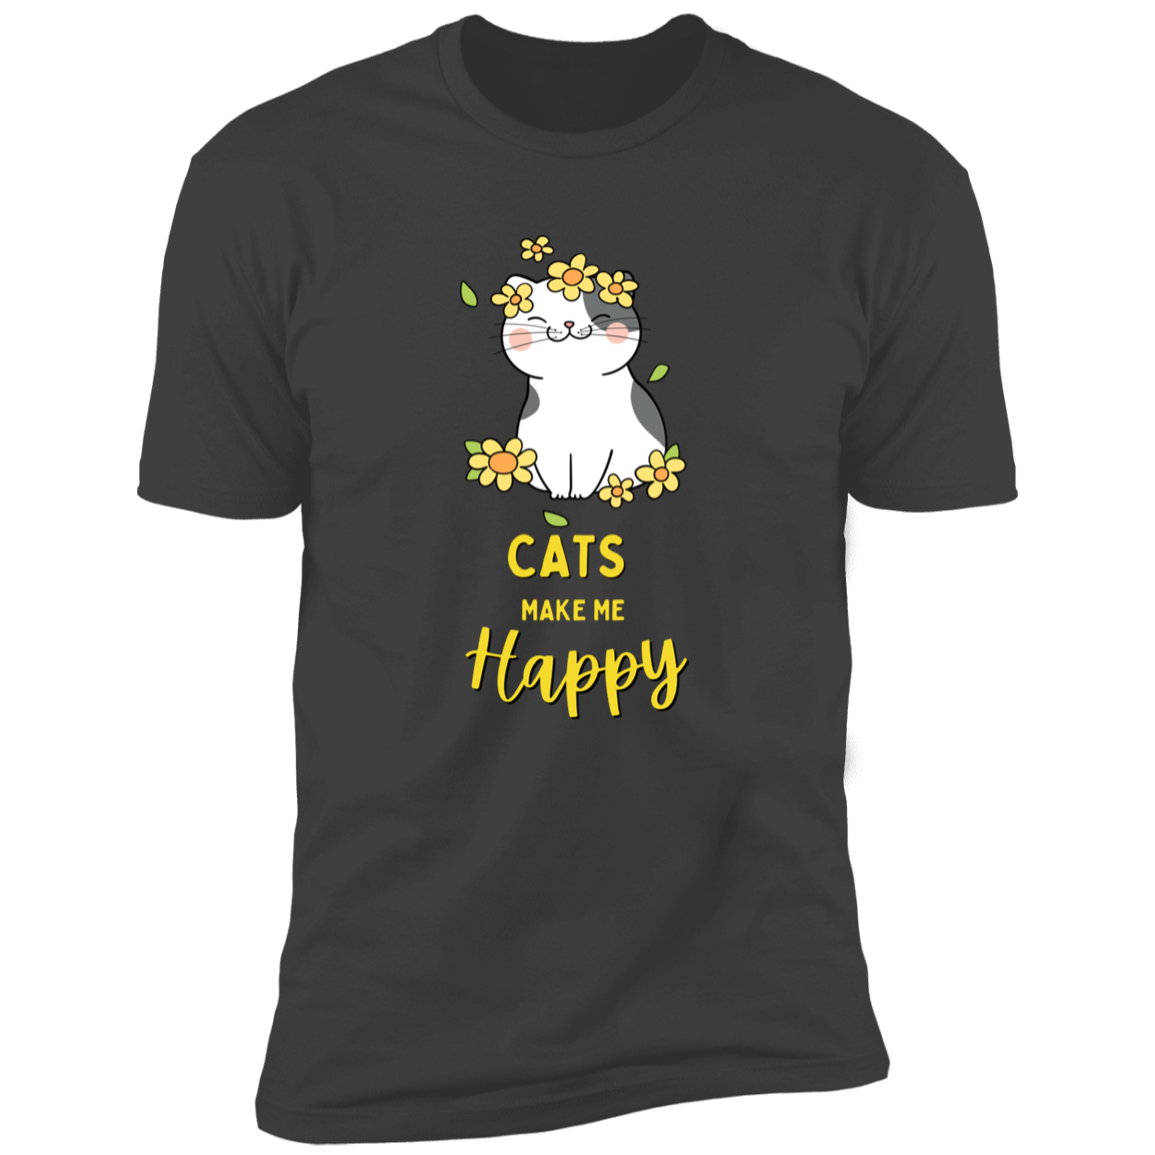 Cats Make Me Happy T-shirt, Cat Shirt for humans, in heavy metal gray